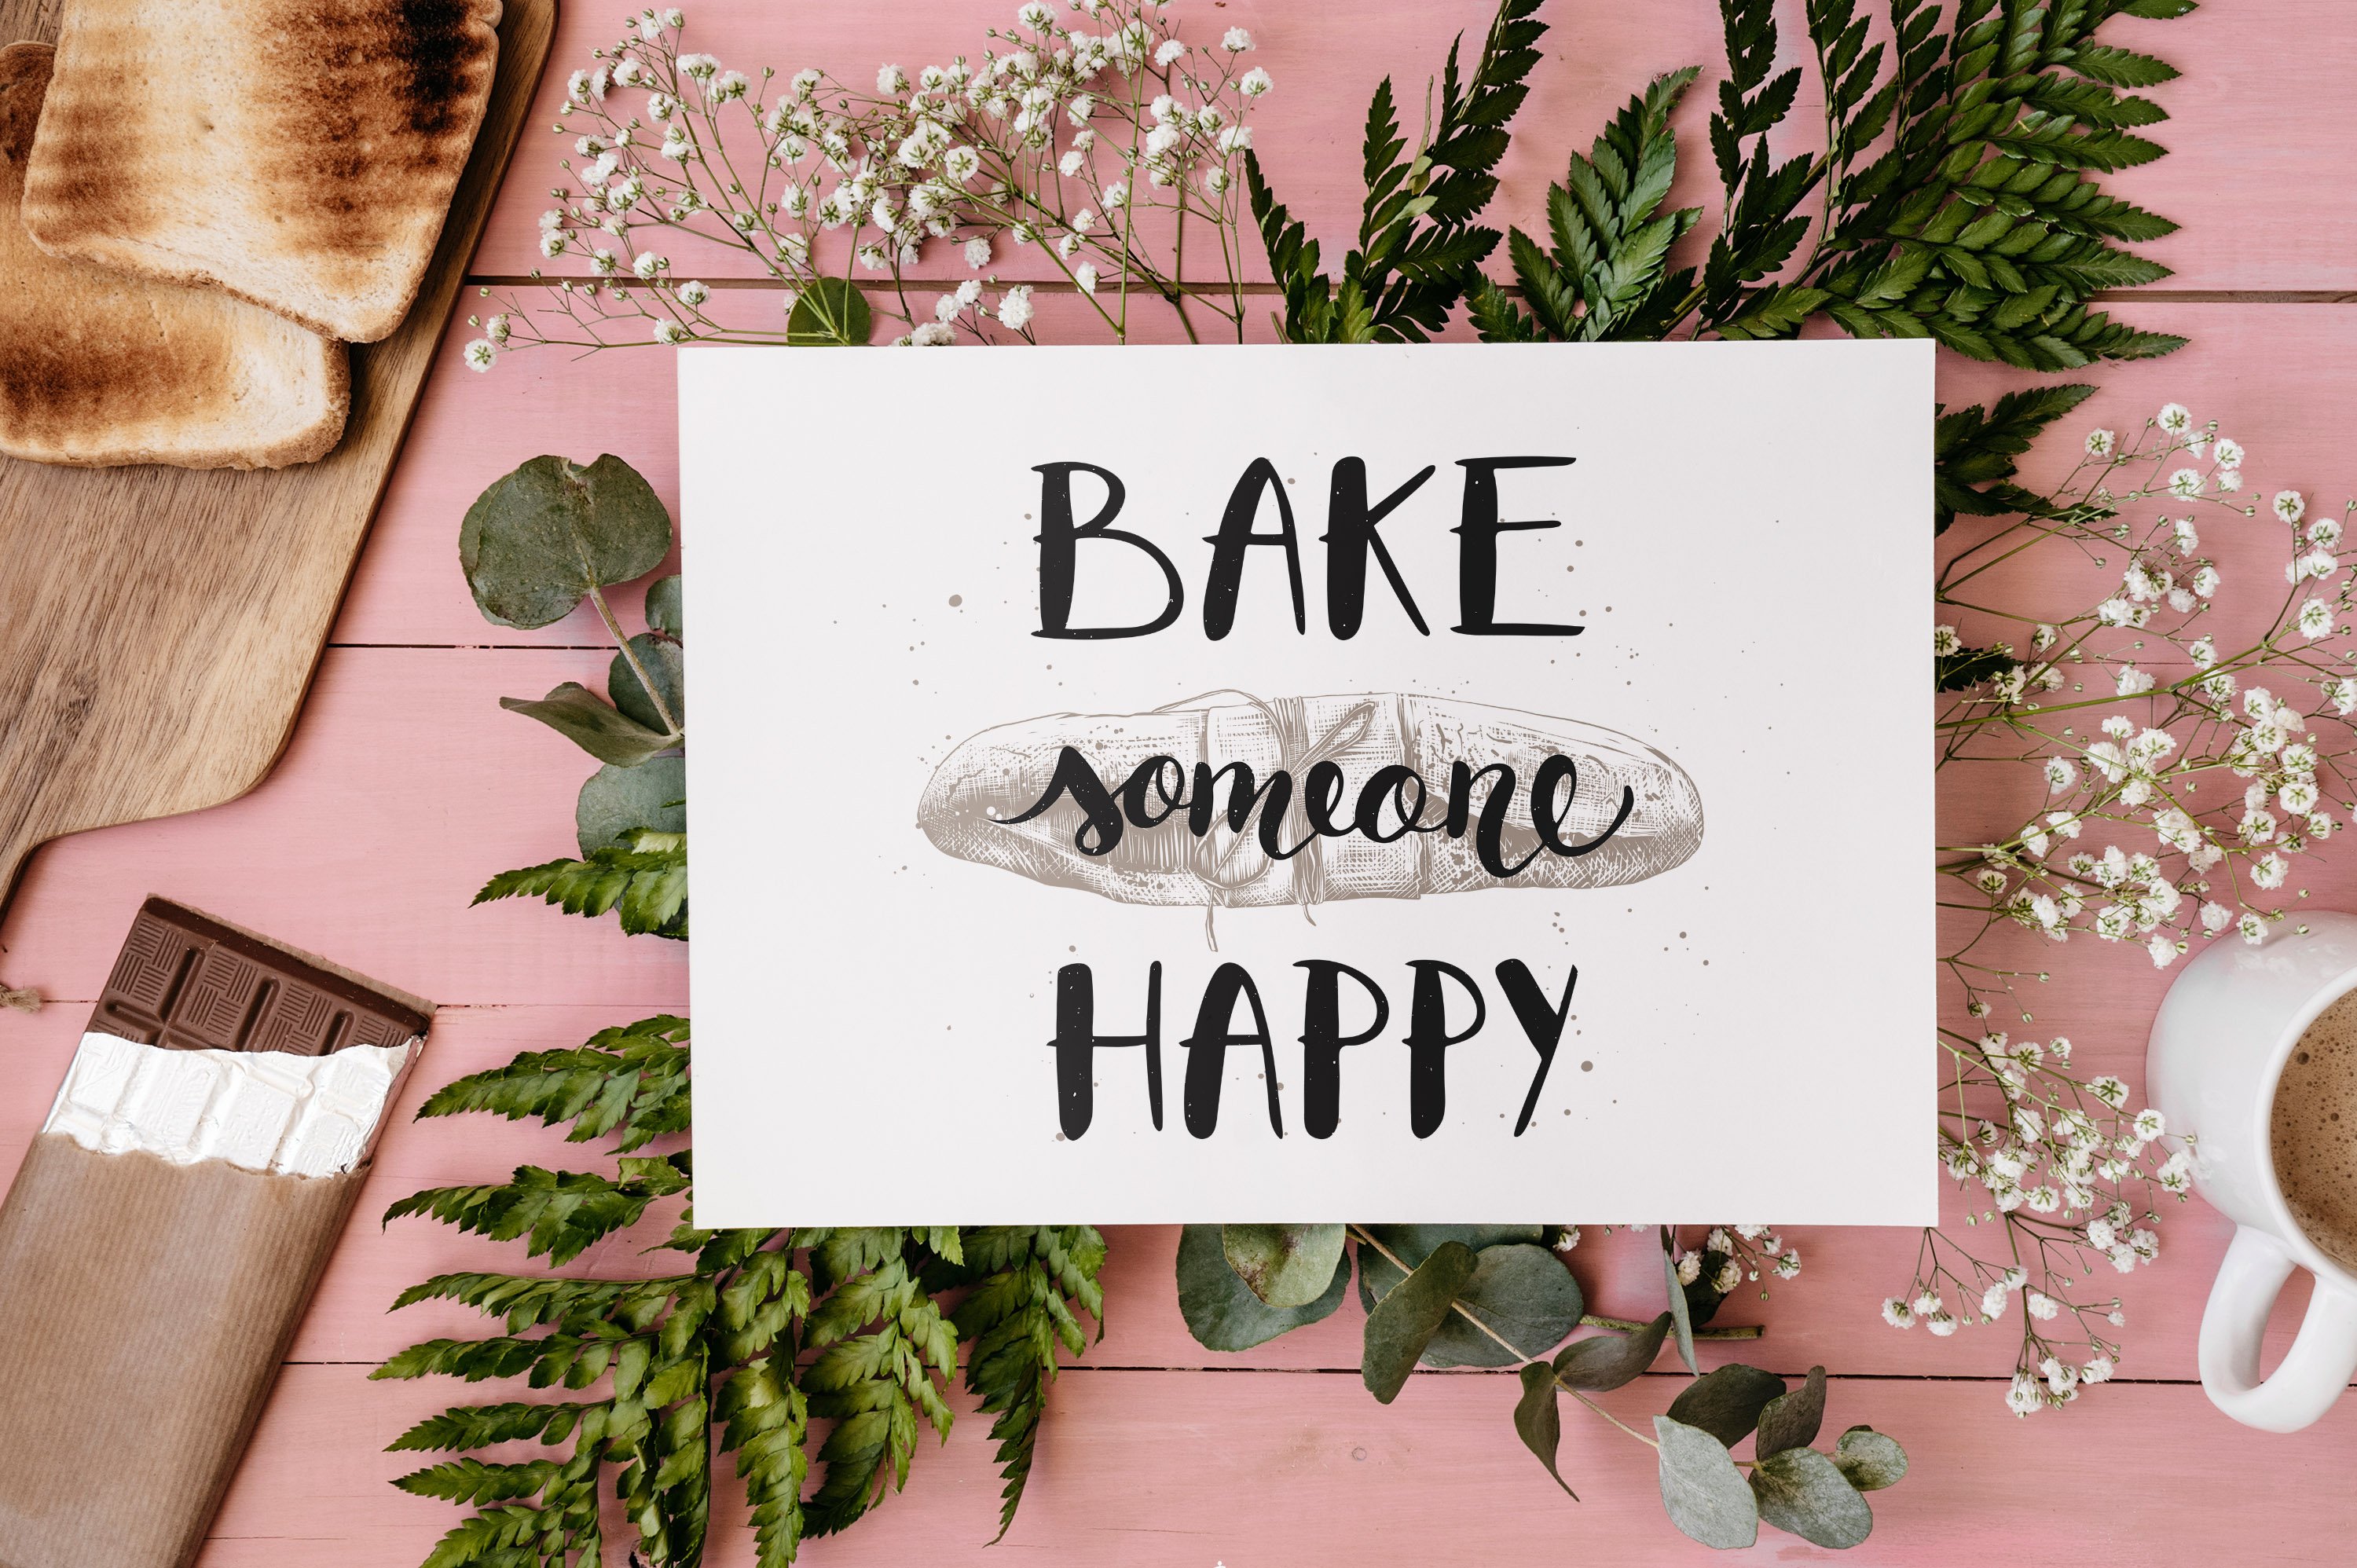 A card that says bake someone happy on it.